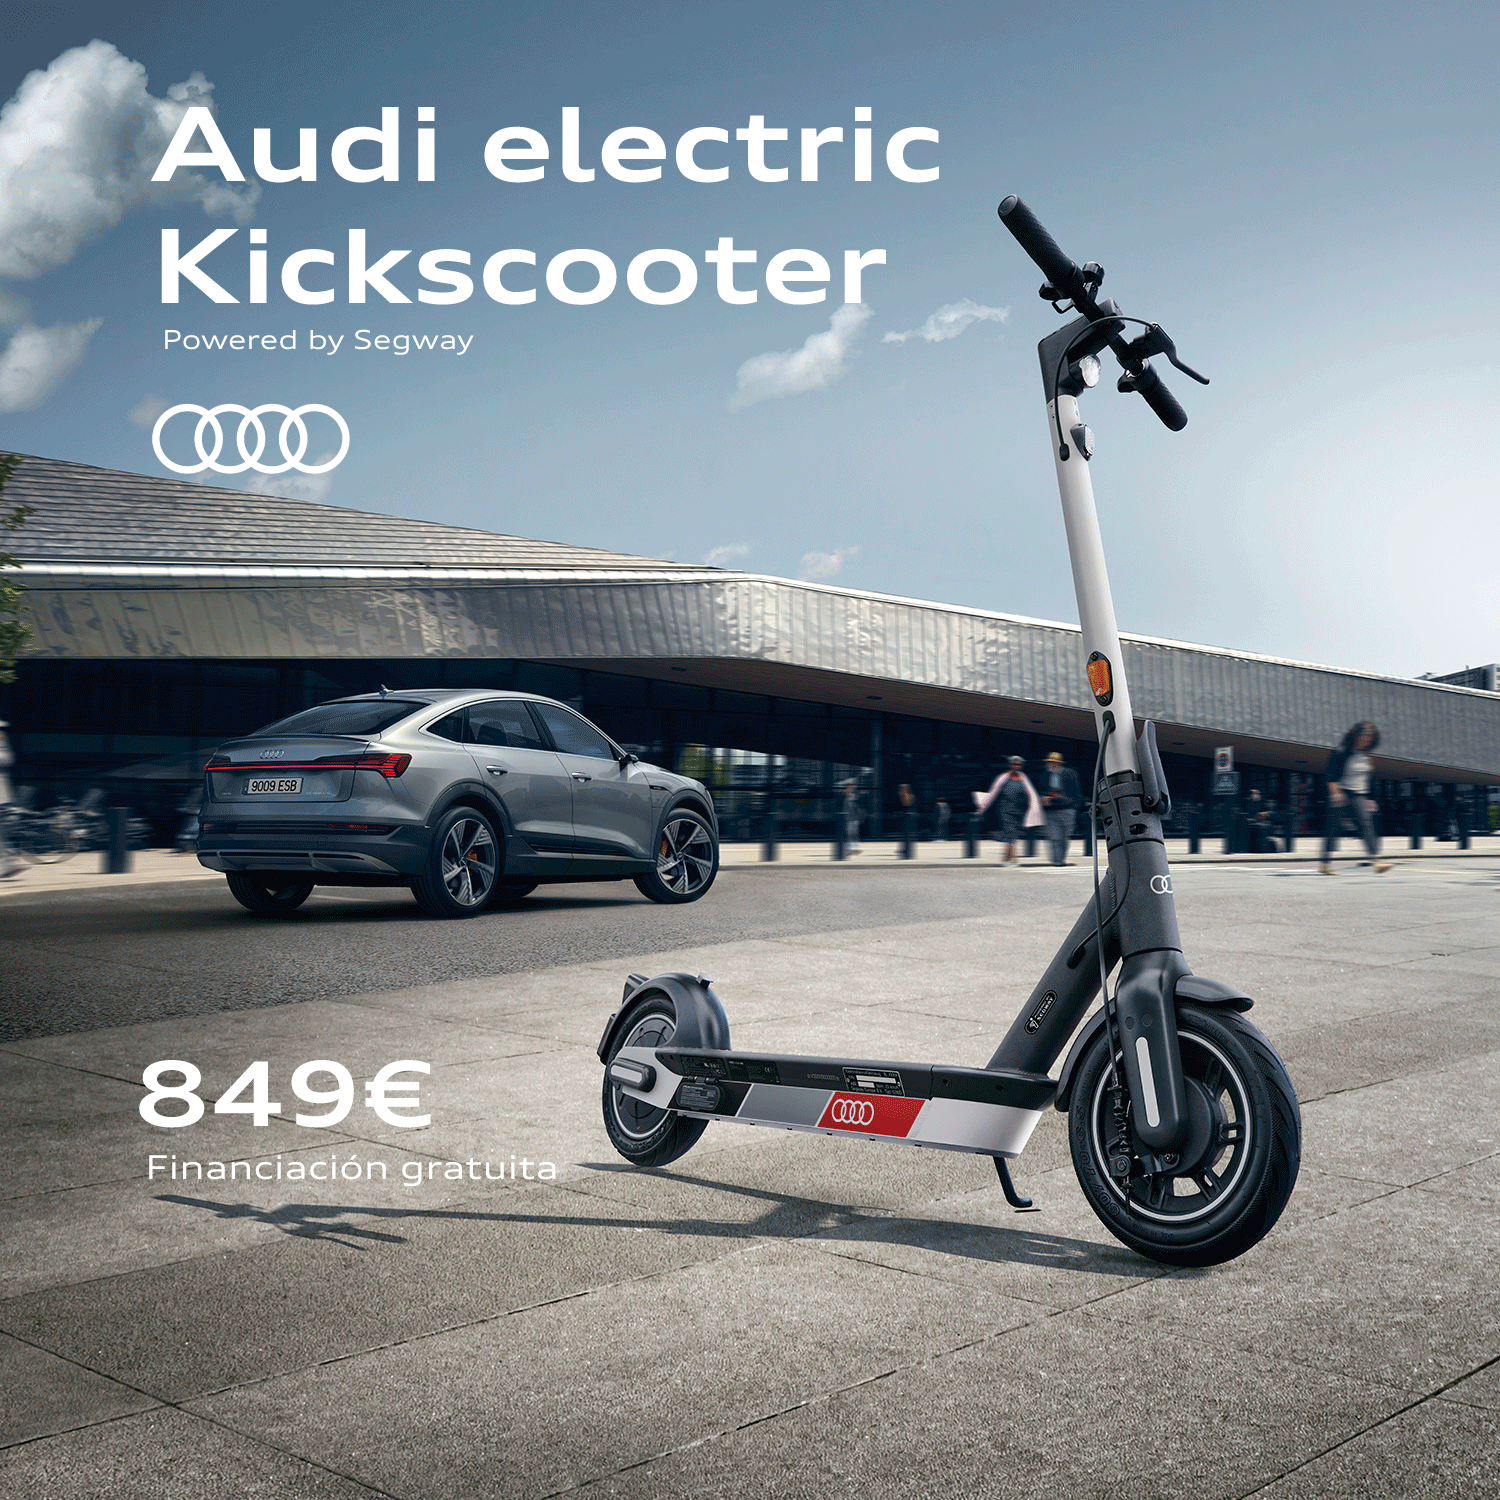 Audi electric kick scooter powered by Segway